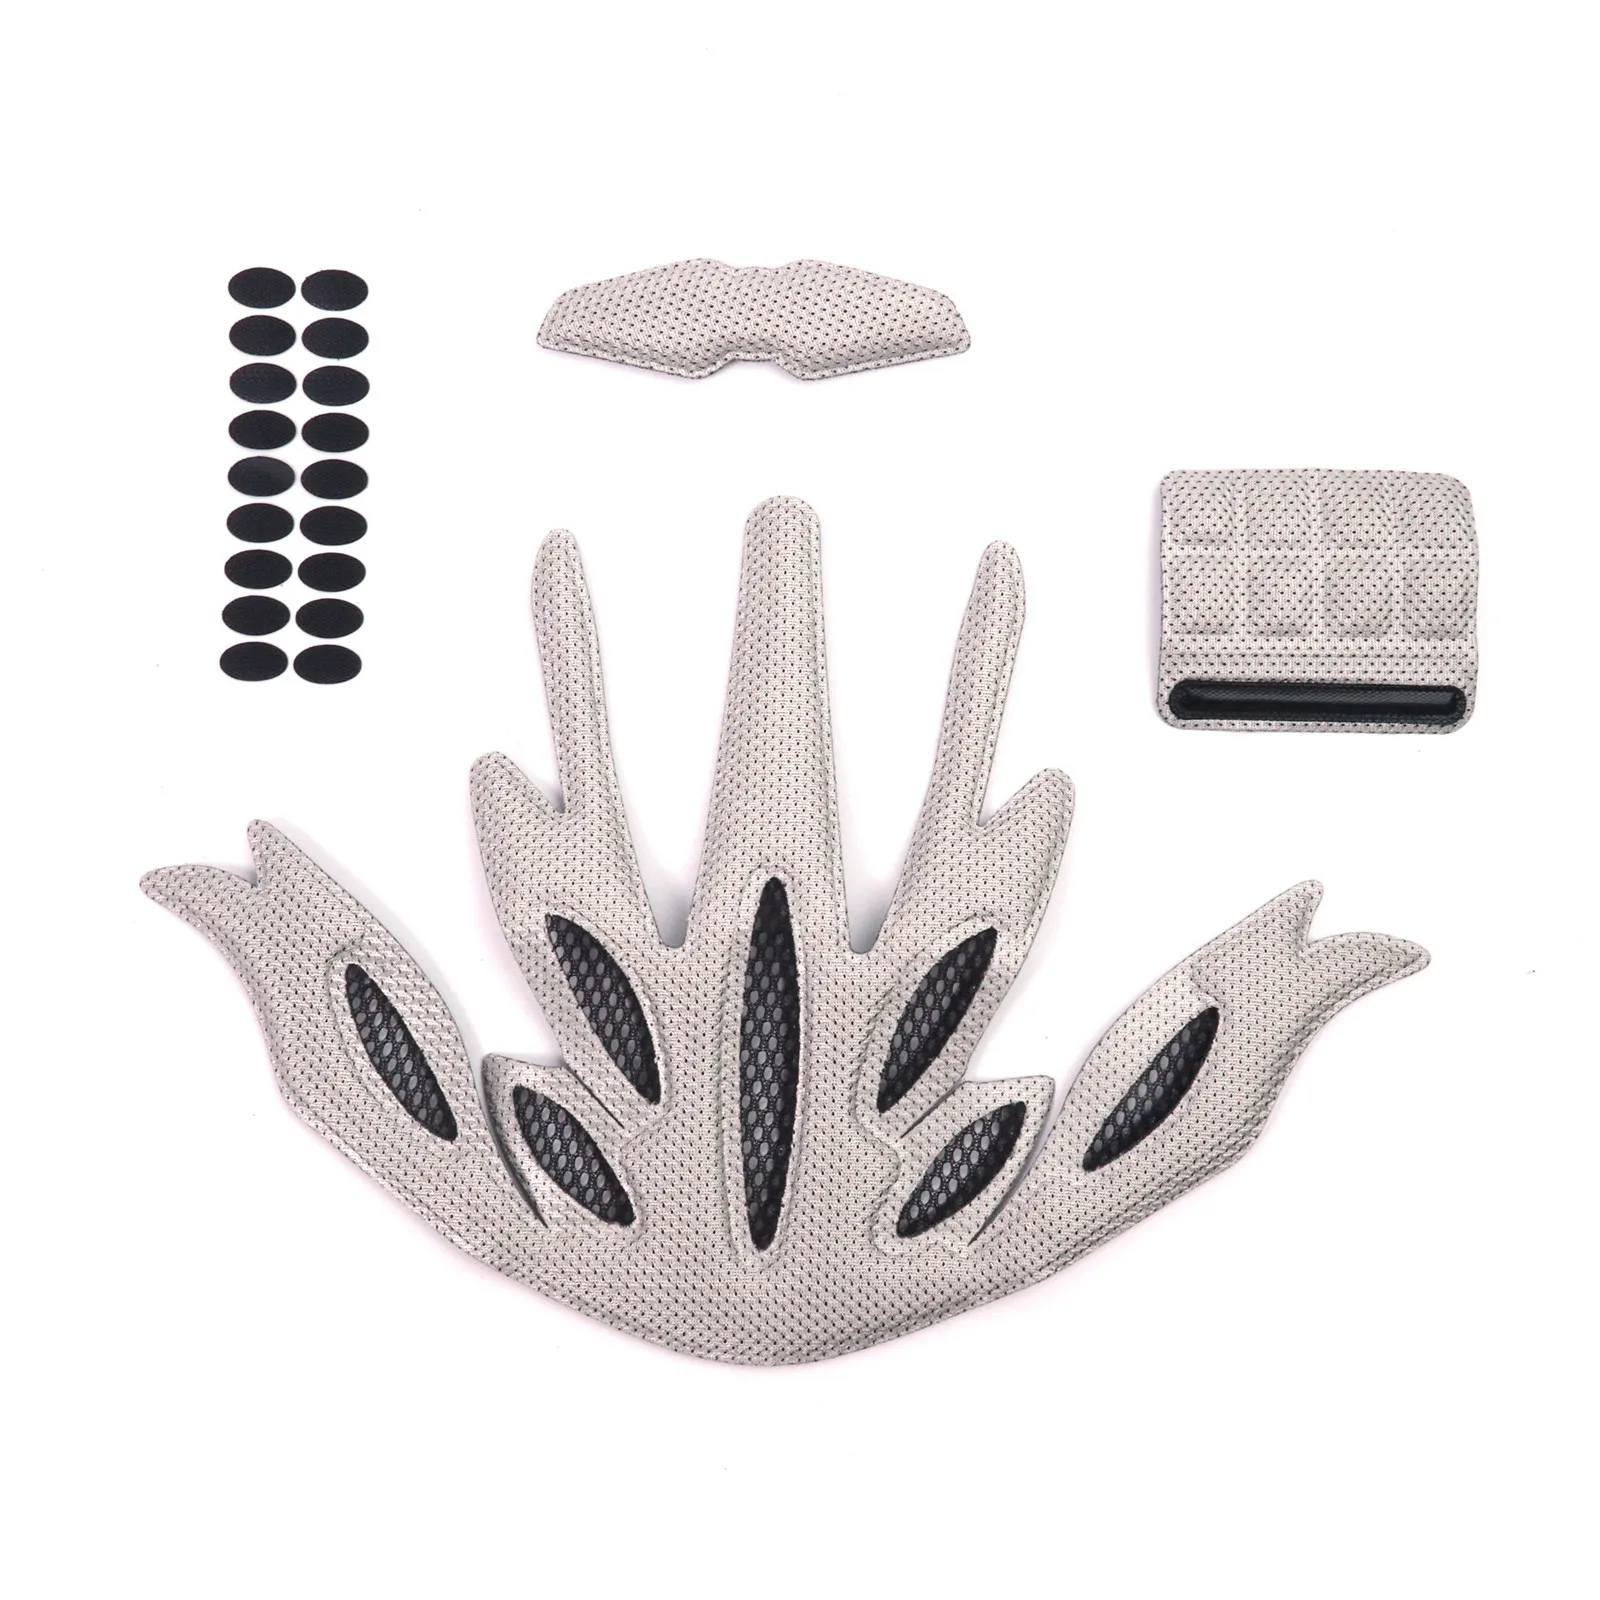 

Helmet Inner Padding Foam Pads Kit Sealed Sponge Net Protective Lining Protection Liner Cushion Mat Accessories for Cycling